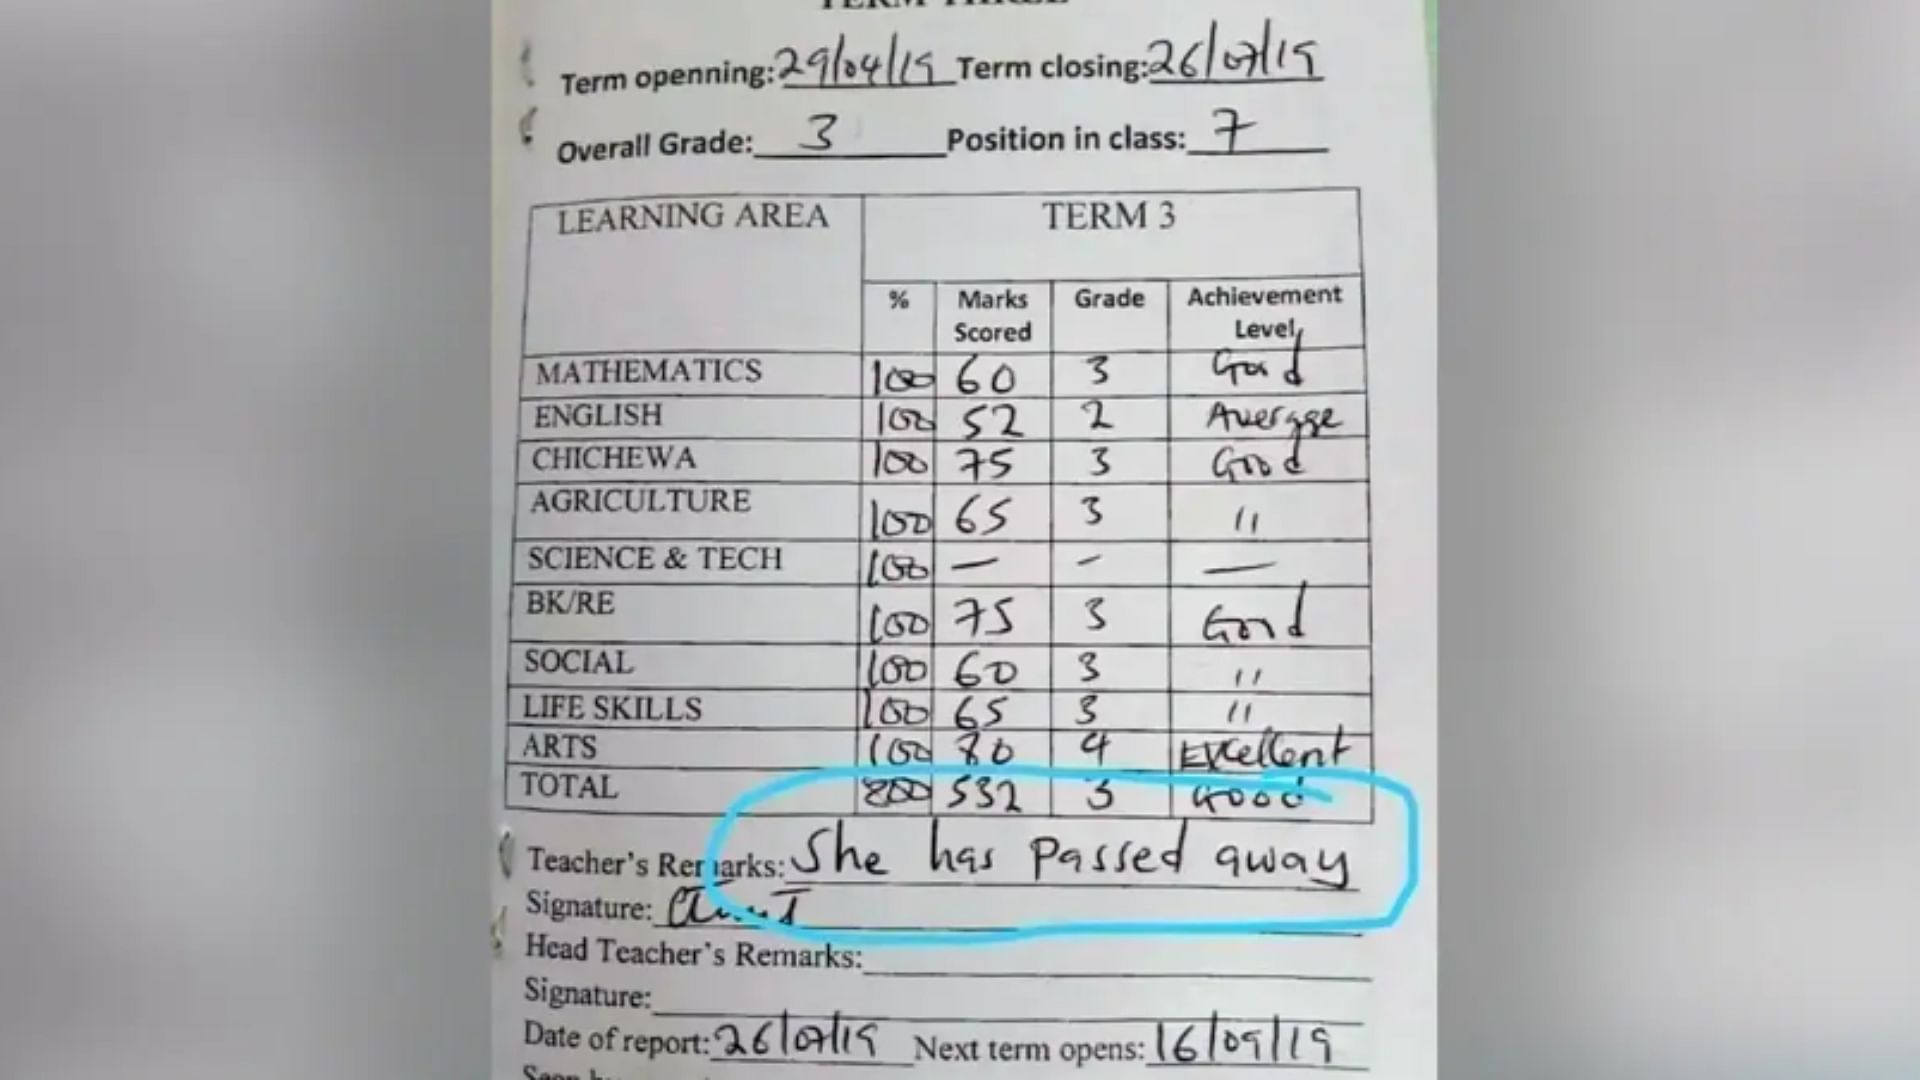 Teacher embarrassing remark on report card goes viral on social media she has passed away